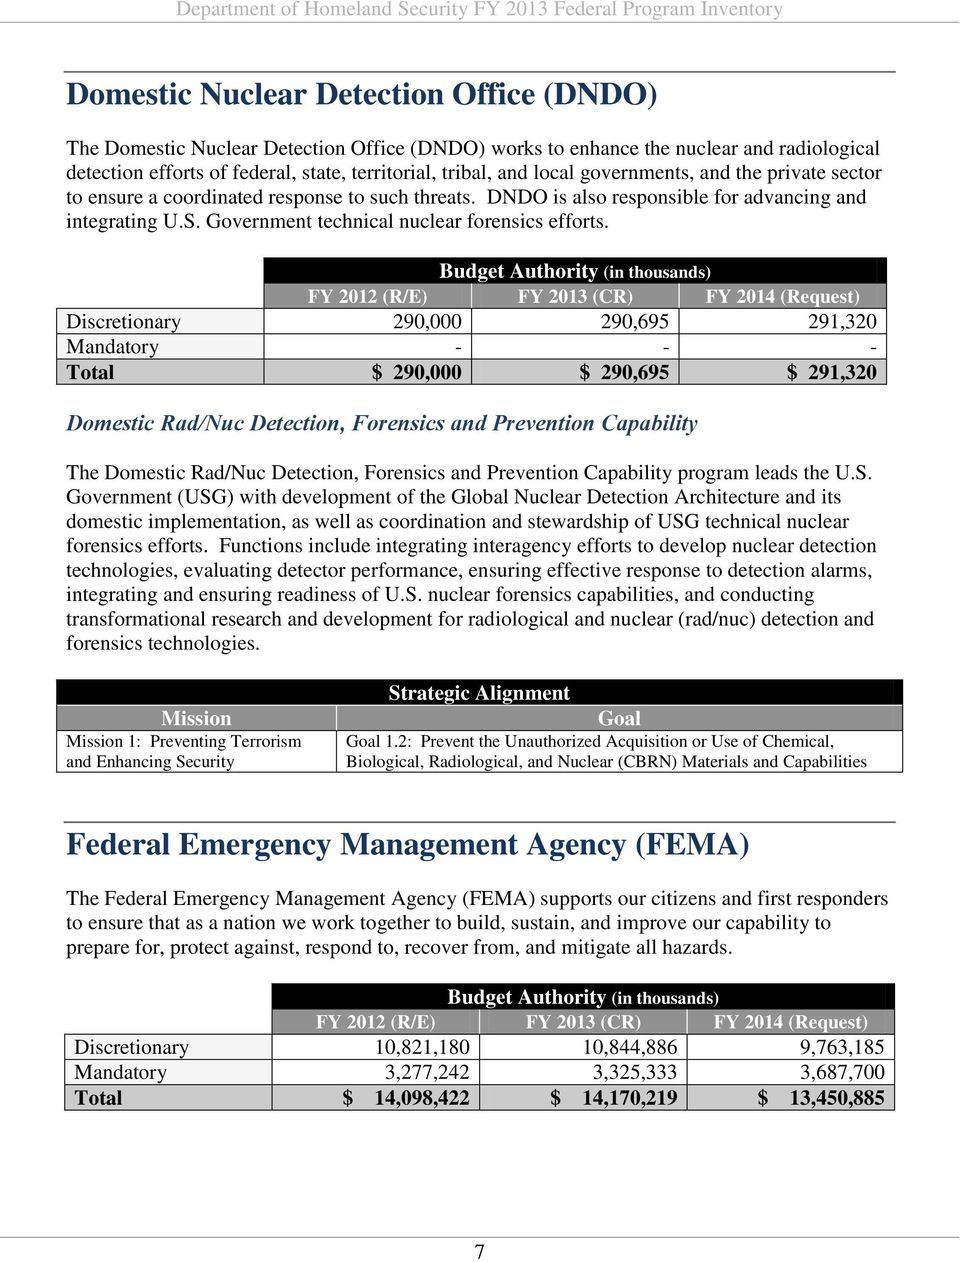 Budget Authority (in thousands) FY 2012 (R/E) FY 2013 (CR) FY 2014 (Request) Discretionary 290,000 290,695 291,320 Mandatory - - - Total $ 290,000 $ 290,695 $ 291,320 Domestic Rad/Nuc Detection,